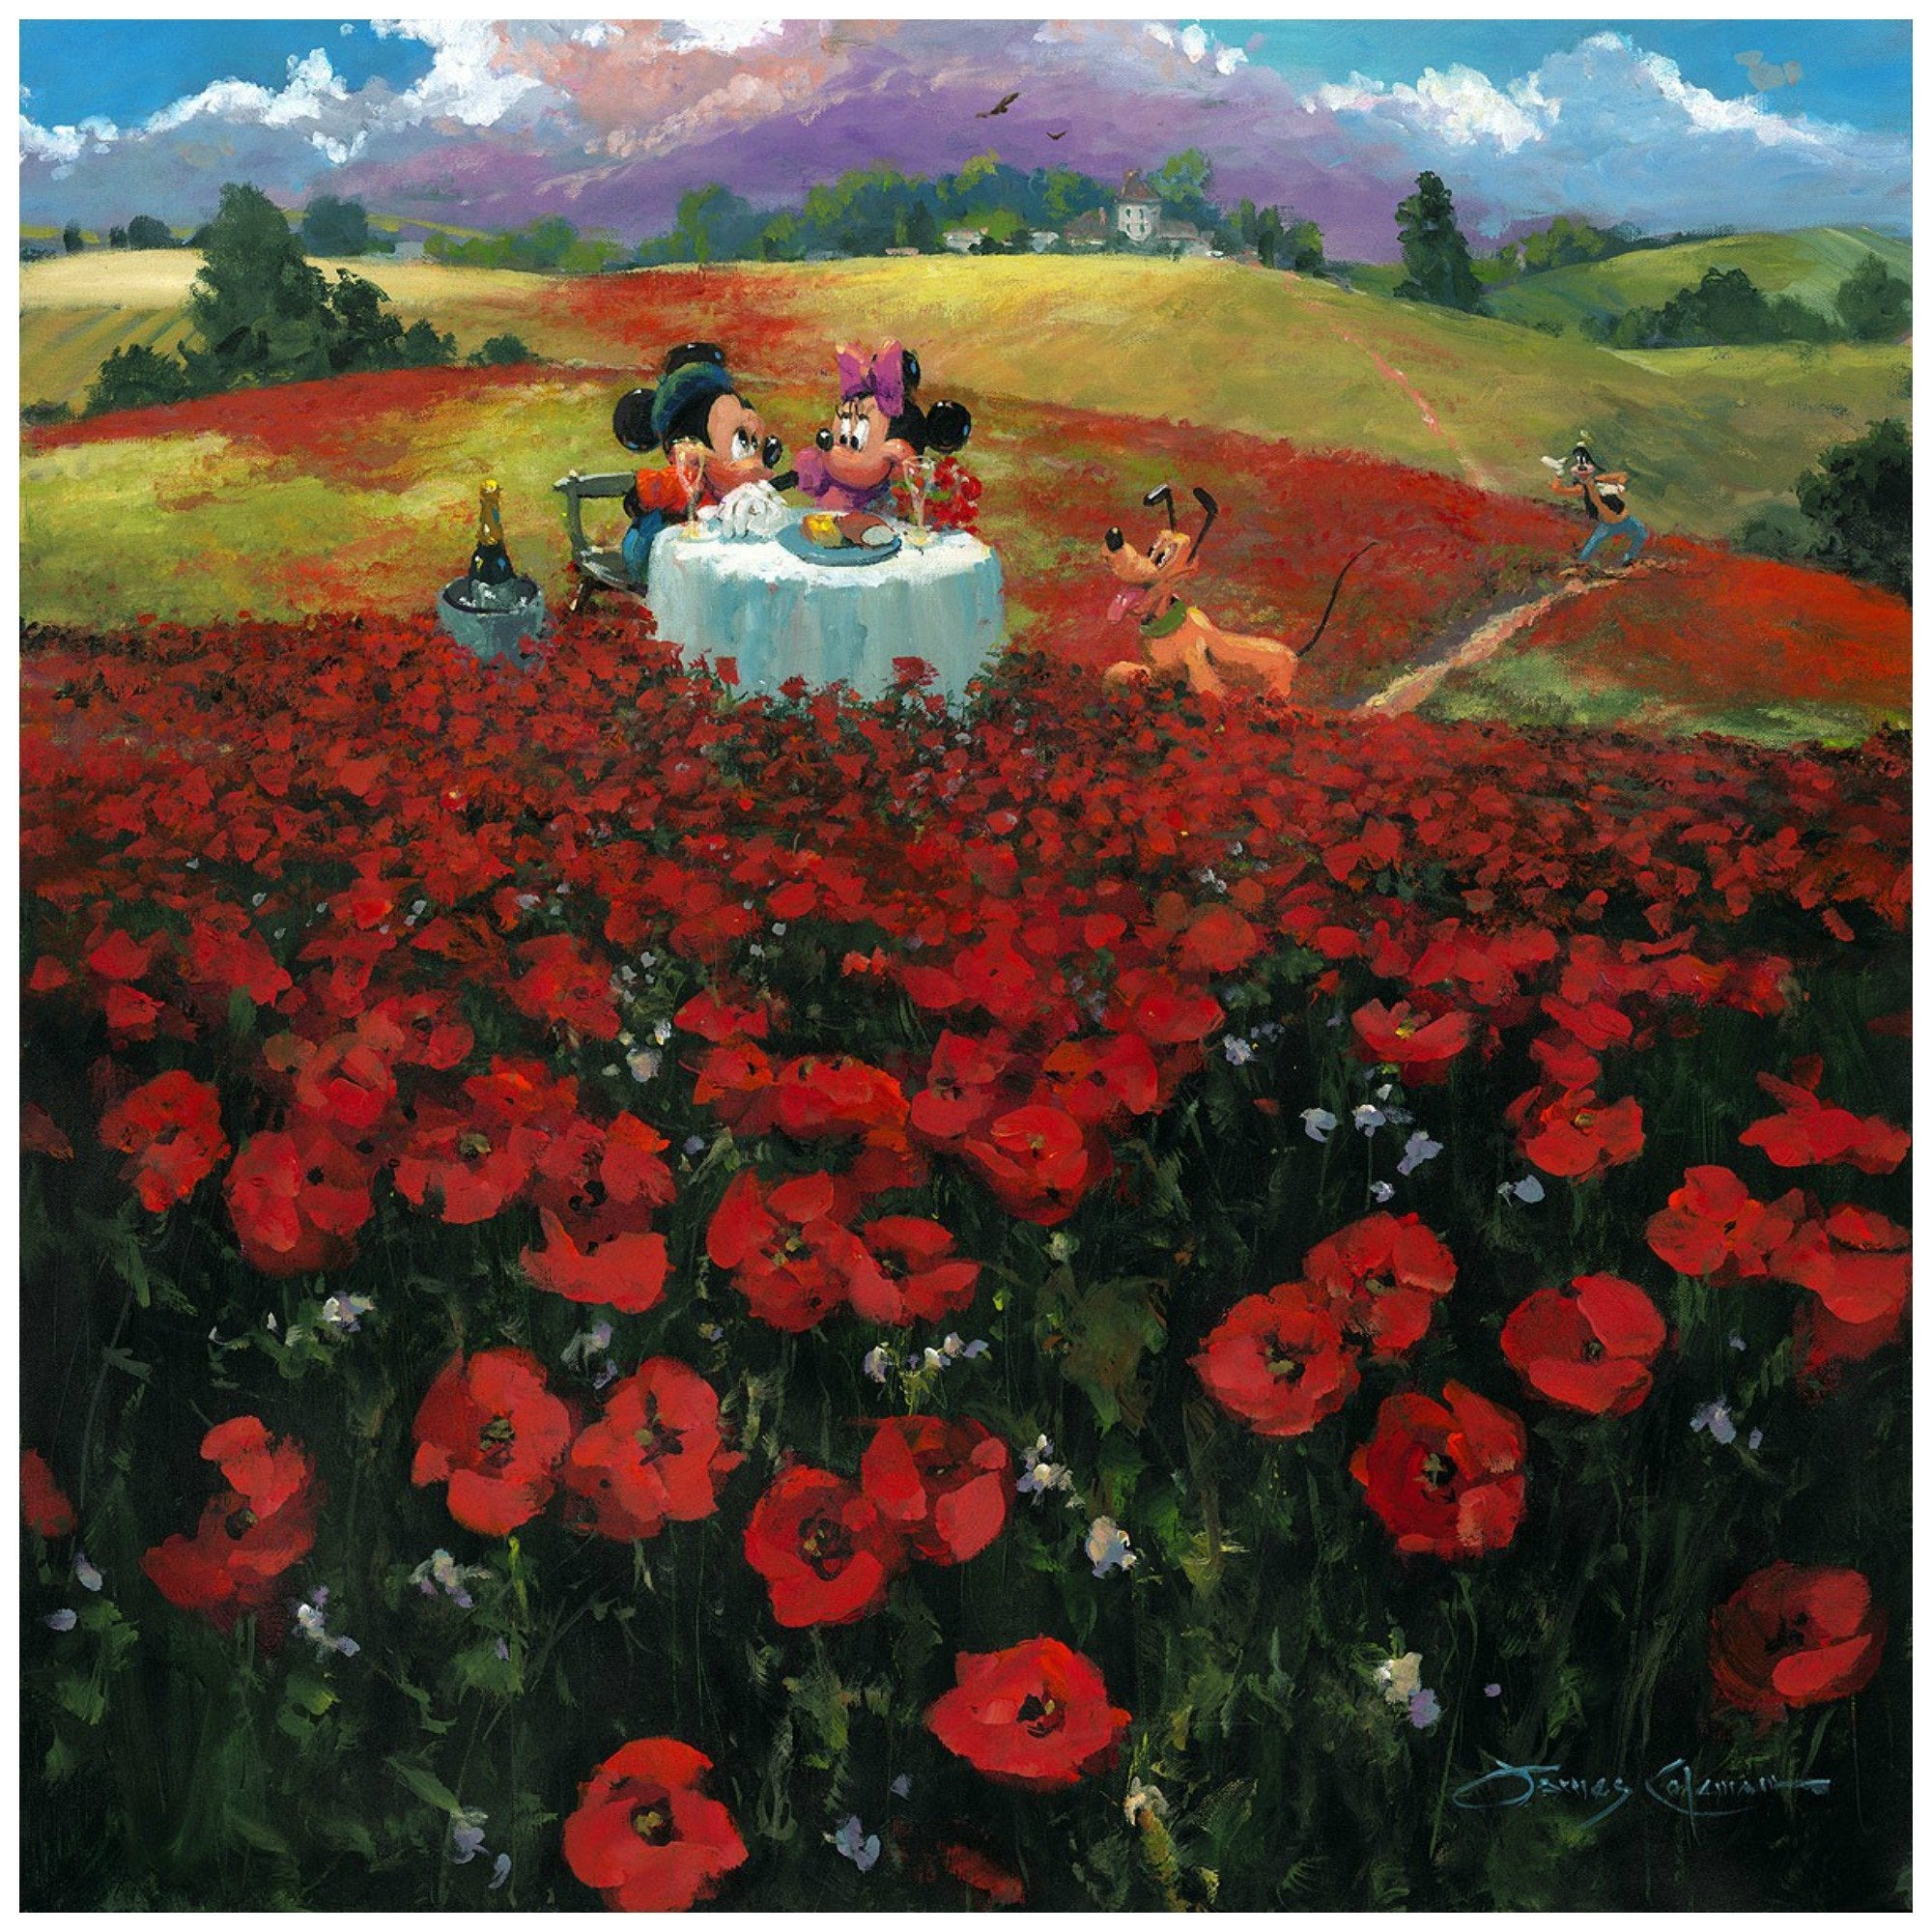 Red Poppies by James Coleman  Mickey and Minnie are dining in the middle of a red poppies field, overlooking the sight of the hills.